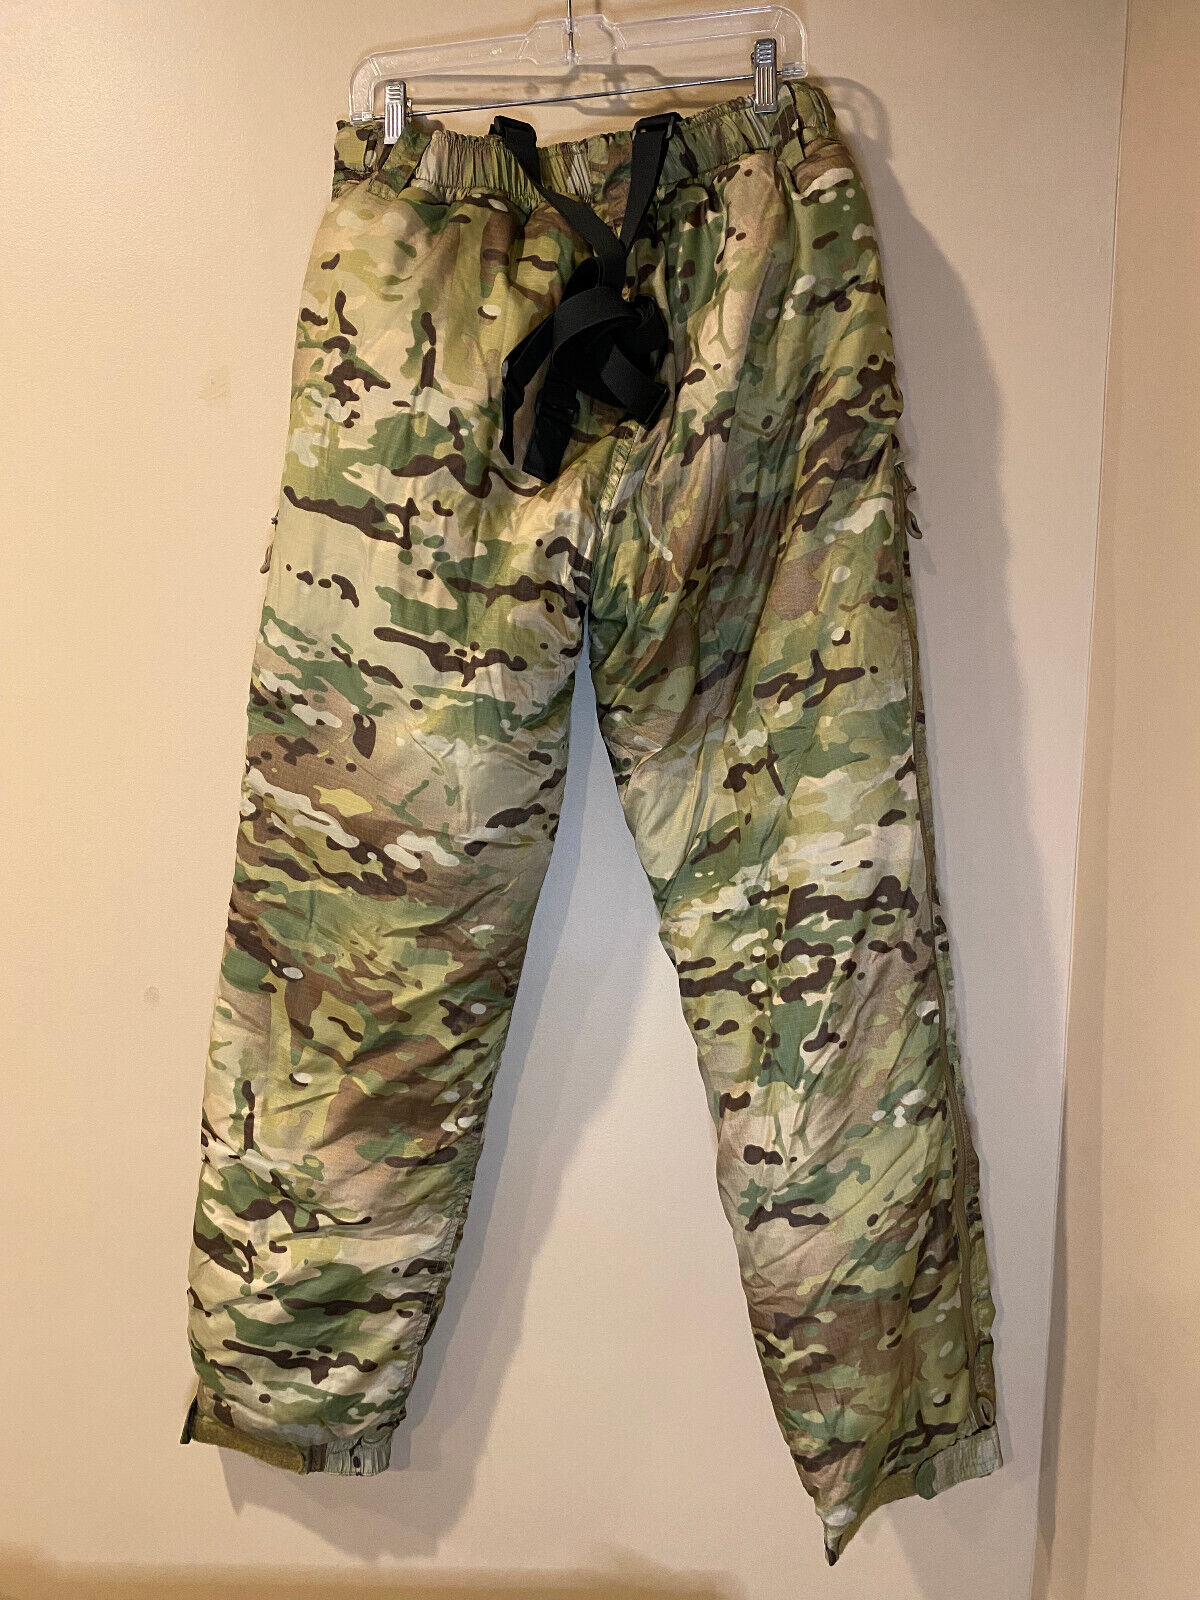 Pre-owned Beyond C7 High Loft Pants Cold Weather With Suspenders L7 Ecwcs Level 7 Multicam